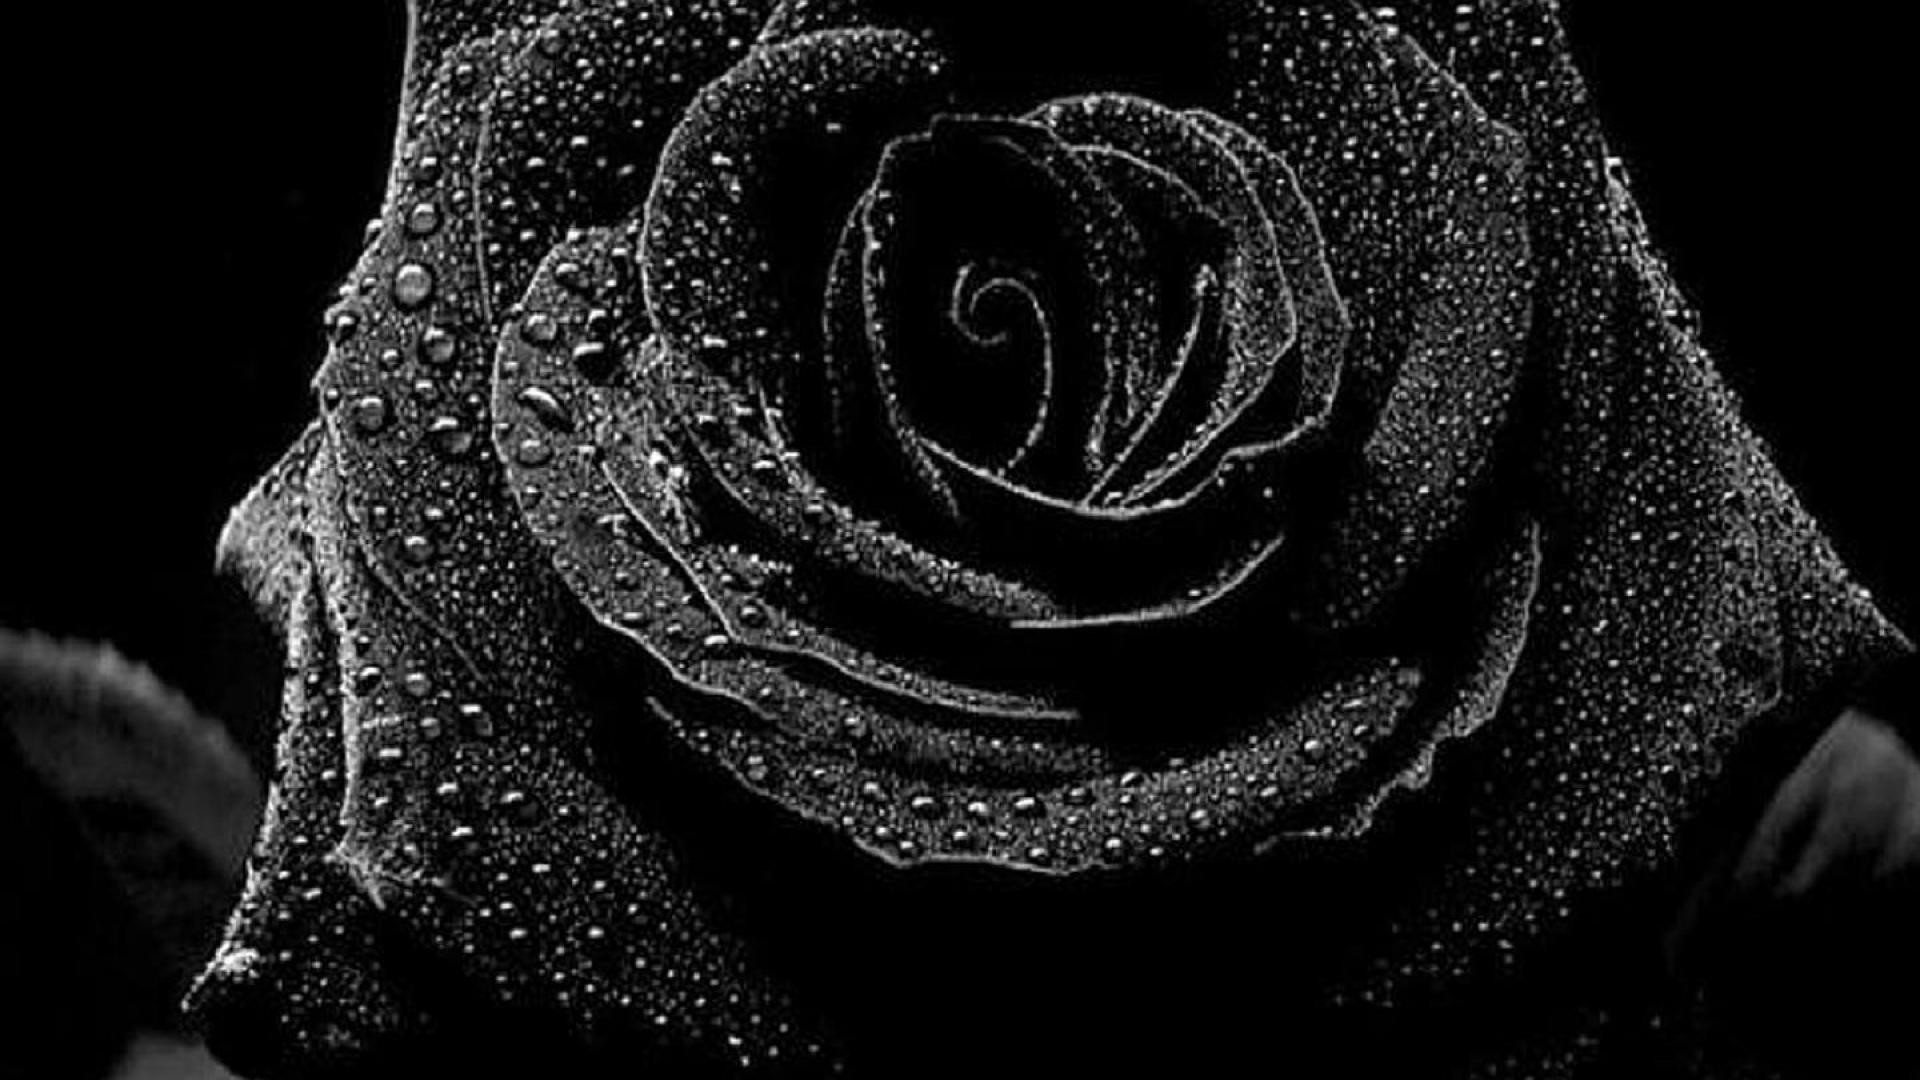 black and white rose wallpaper,black,monochrome photography,black and white,water,rose